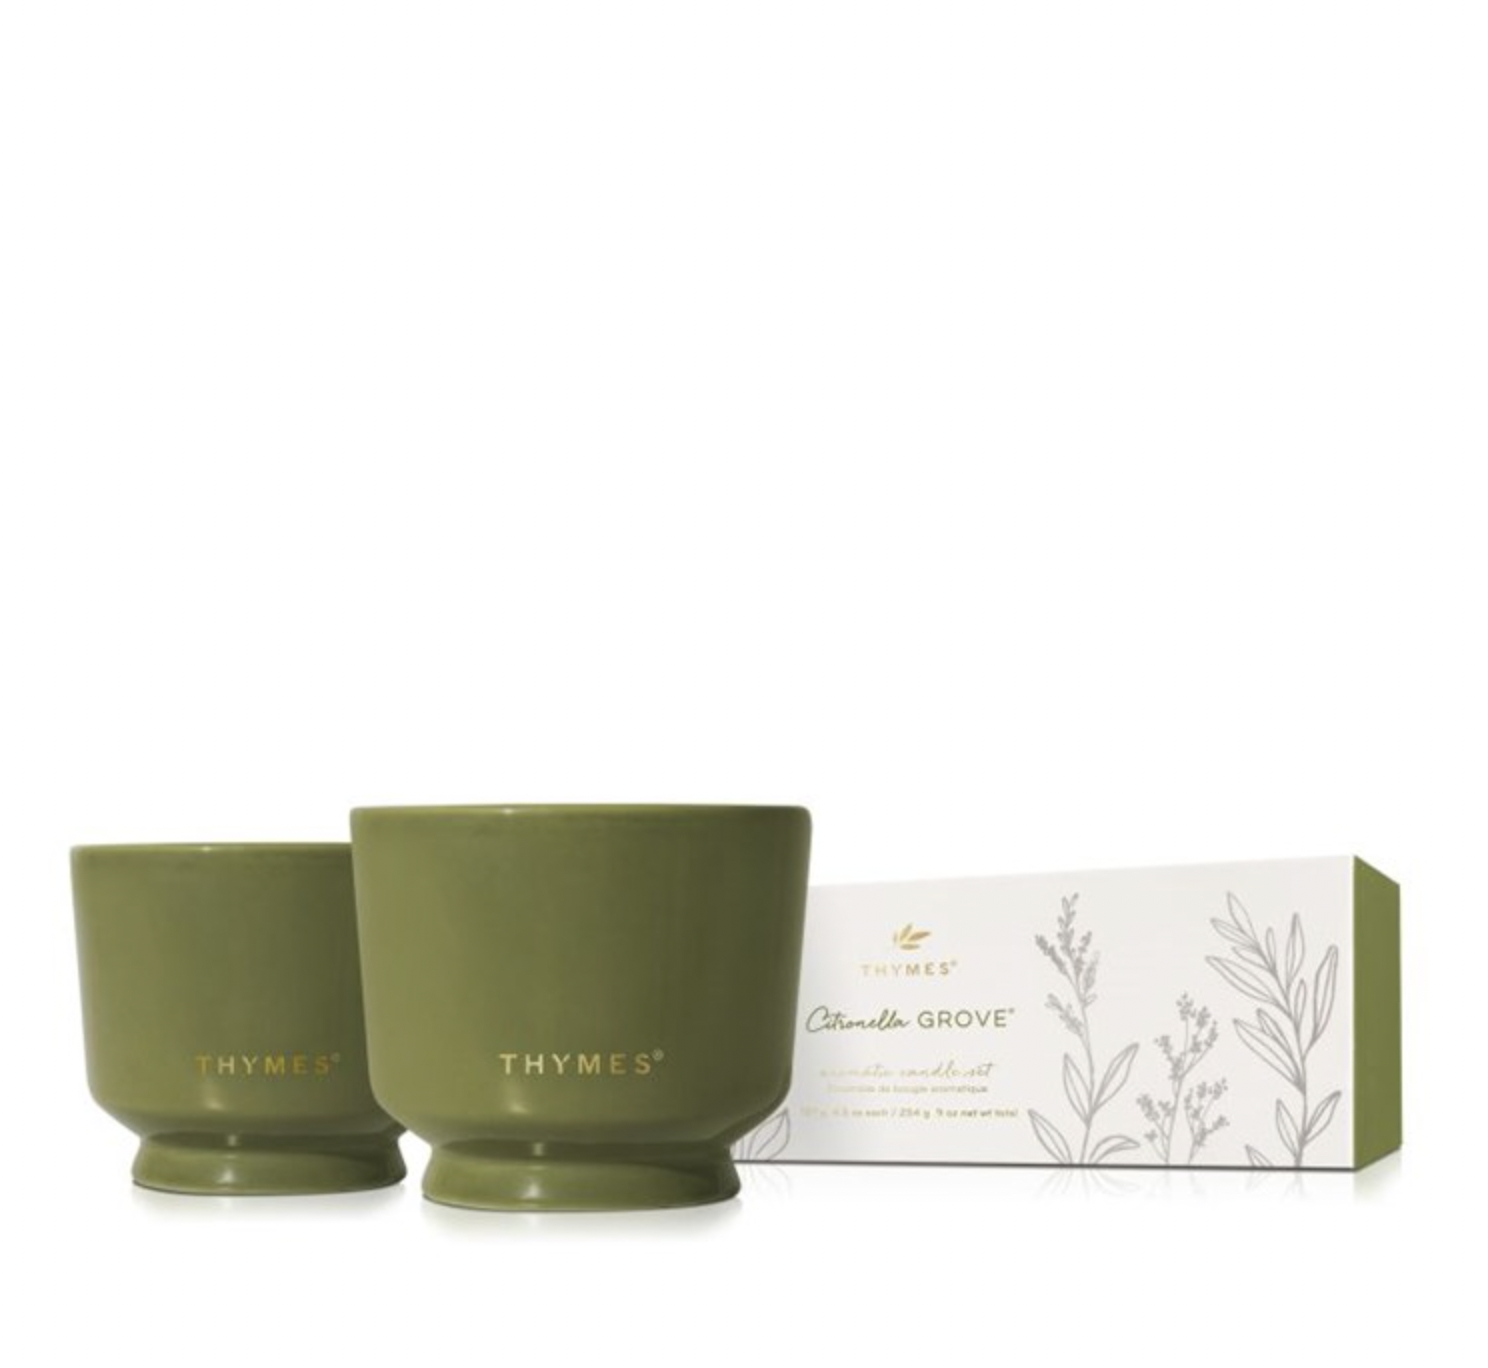 THYMES CITRONELLA GROVE AROMATIC CANDLE SET